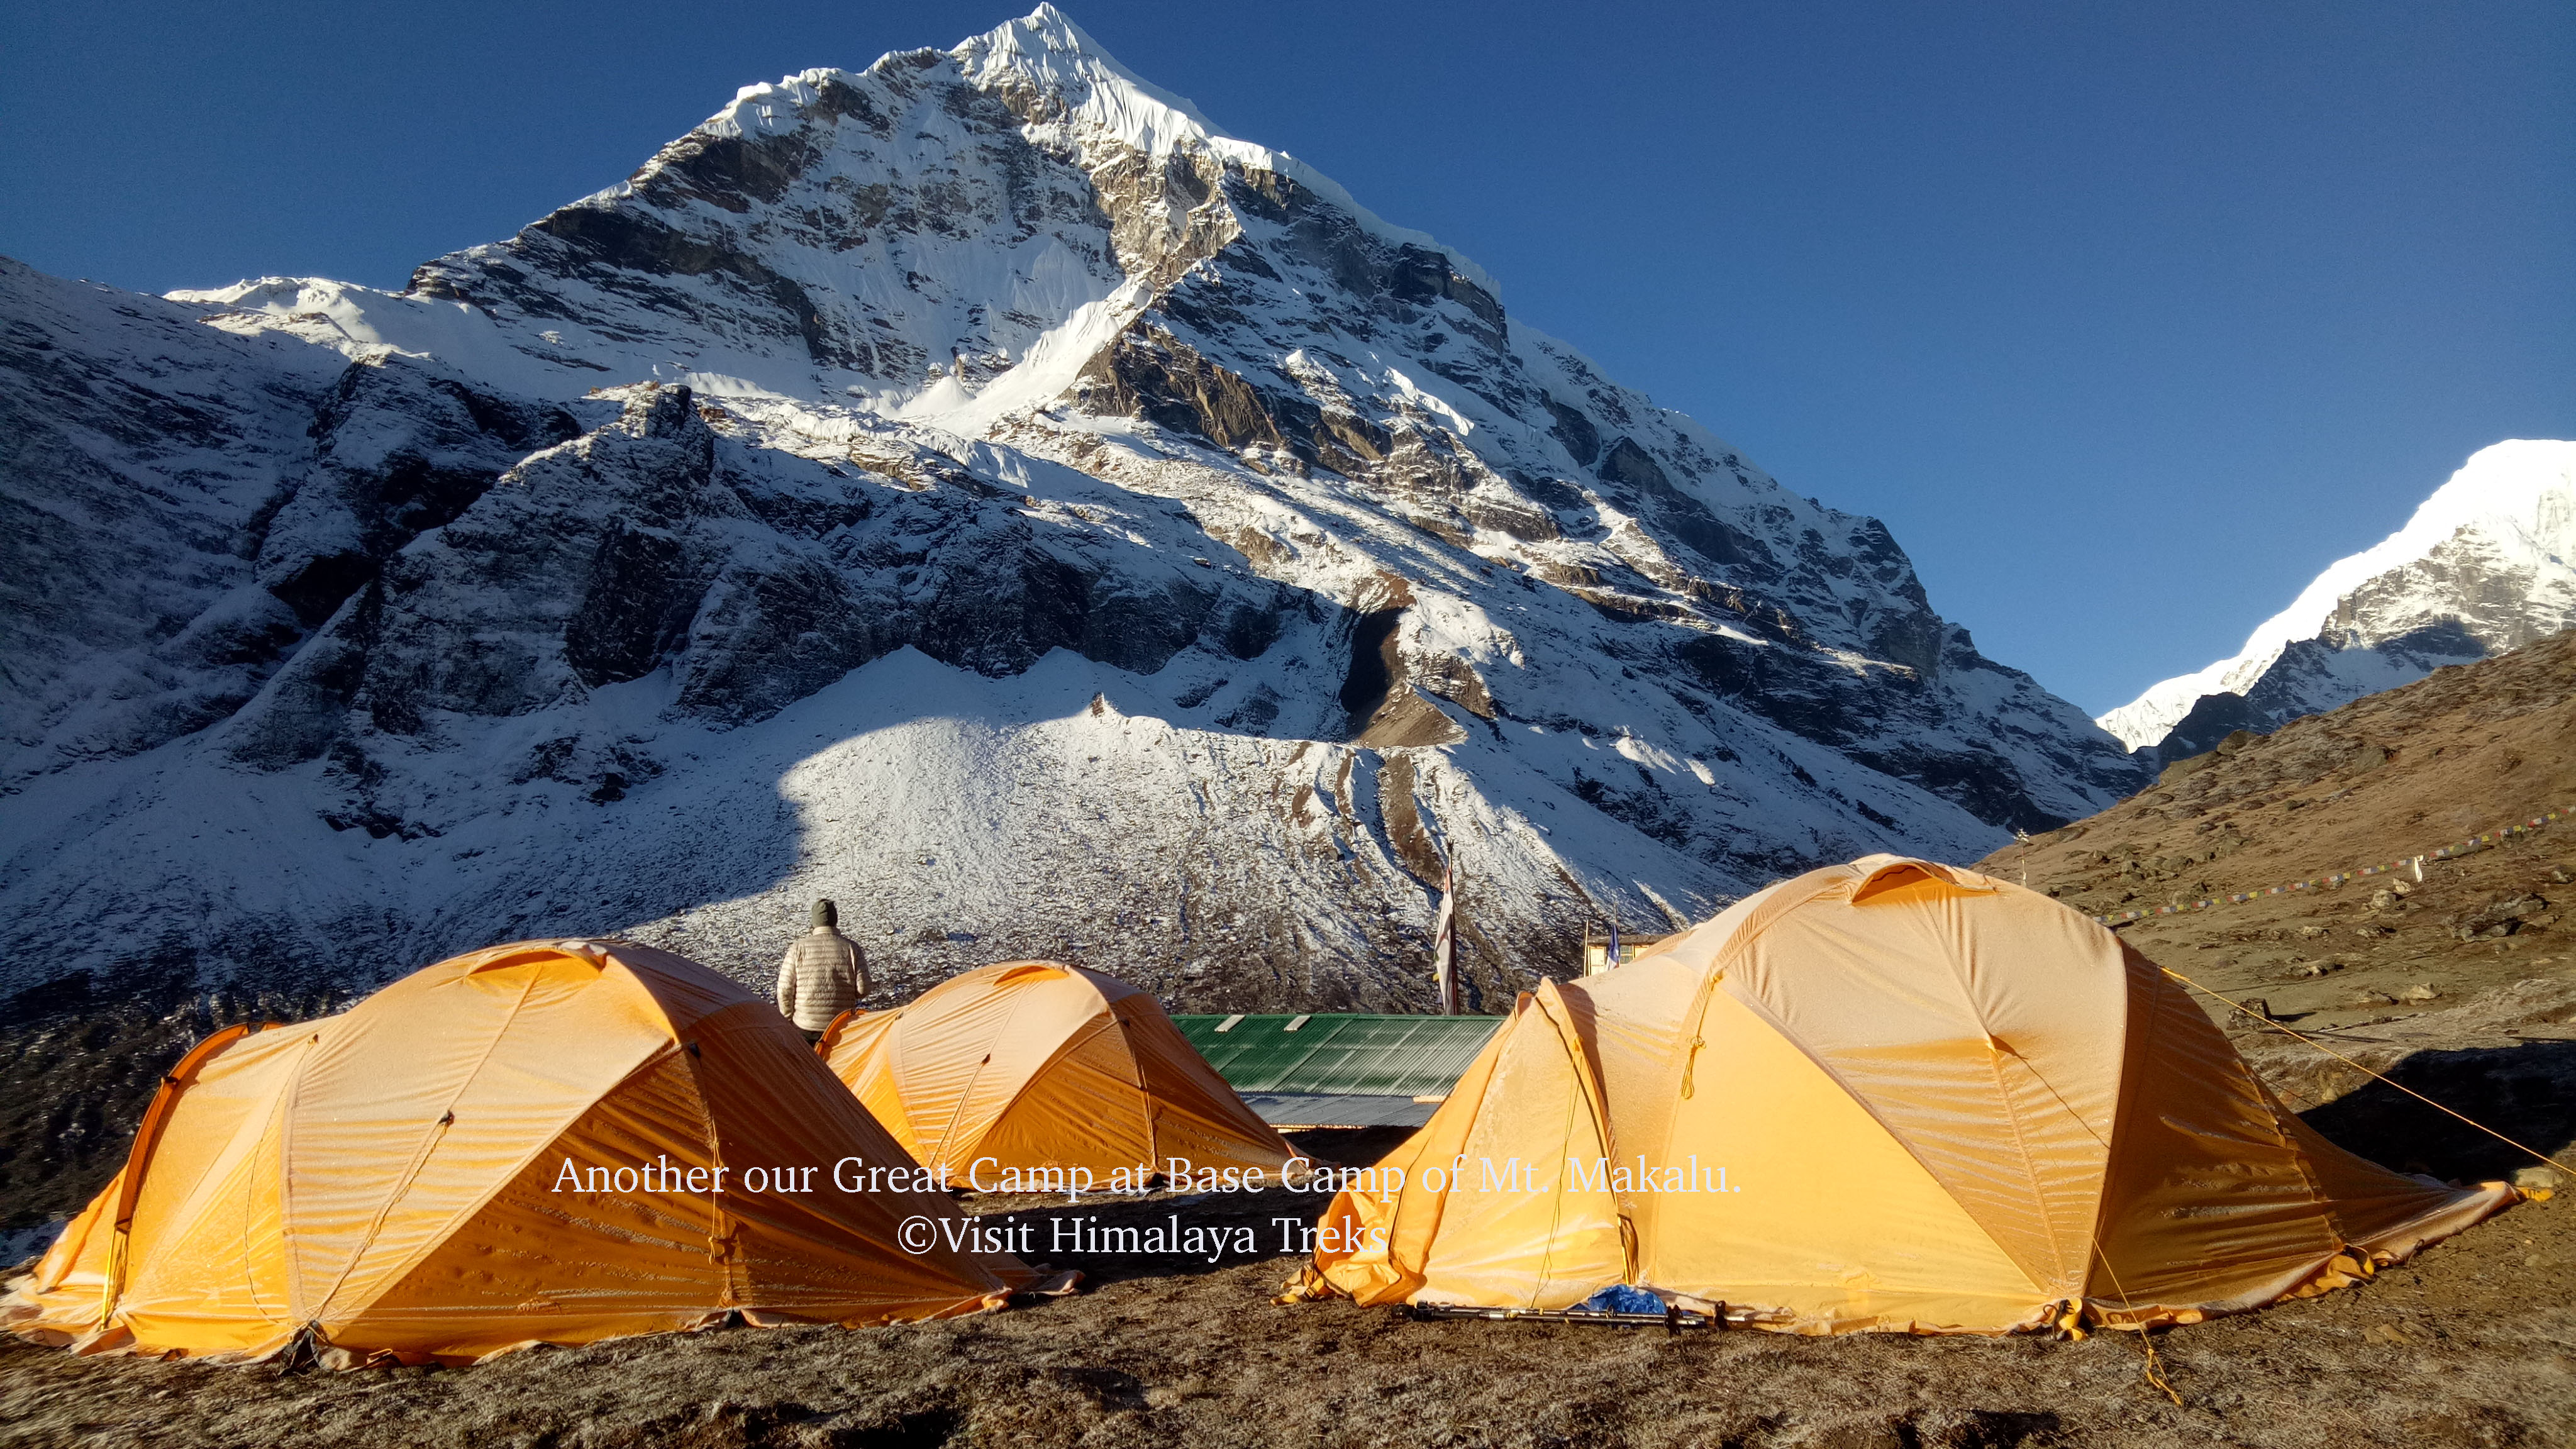 Another our Great Camp at Base Camp of Mt. Makalu.